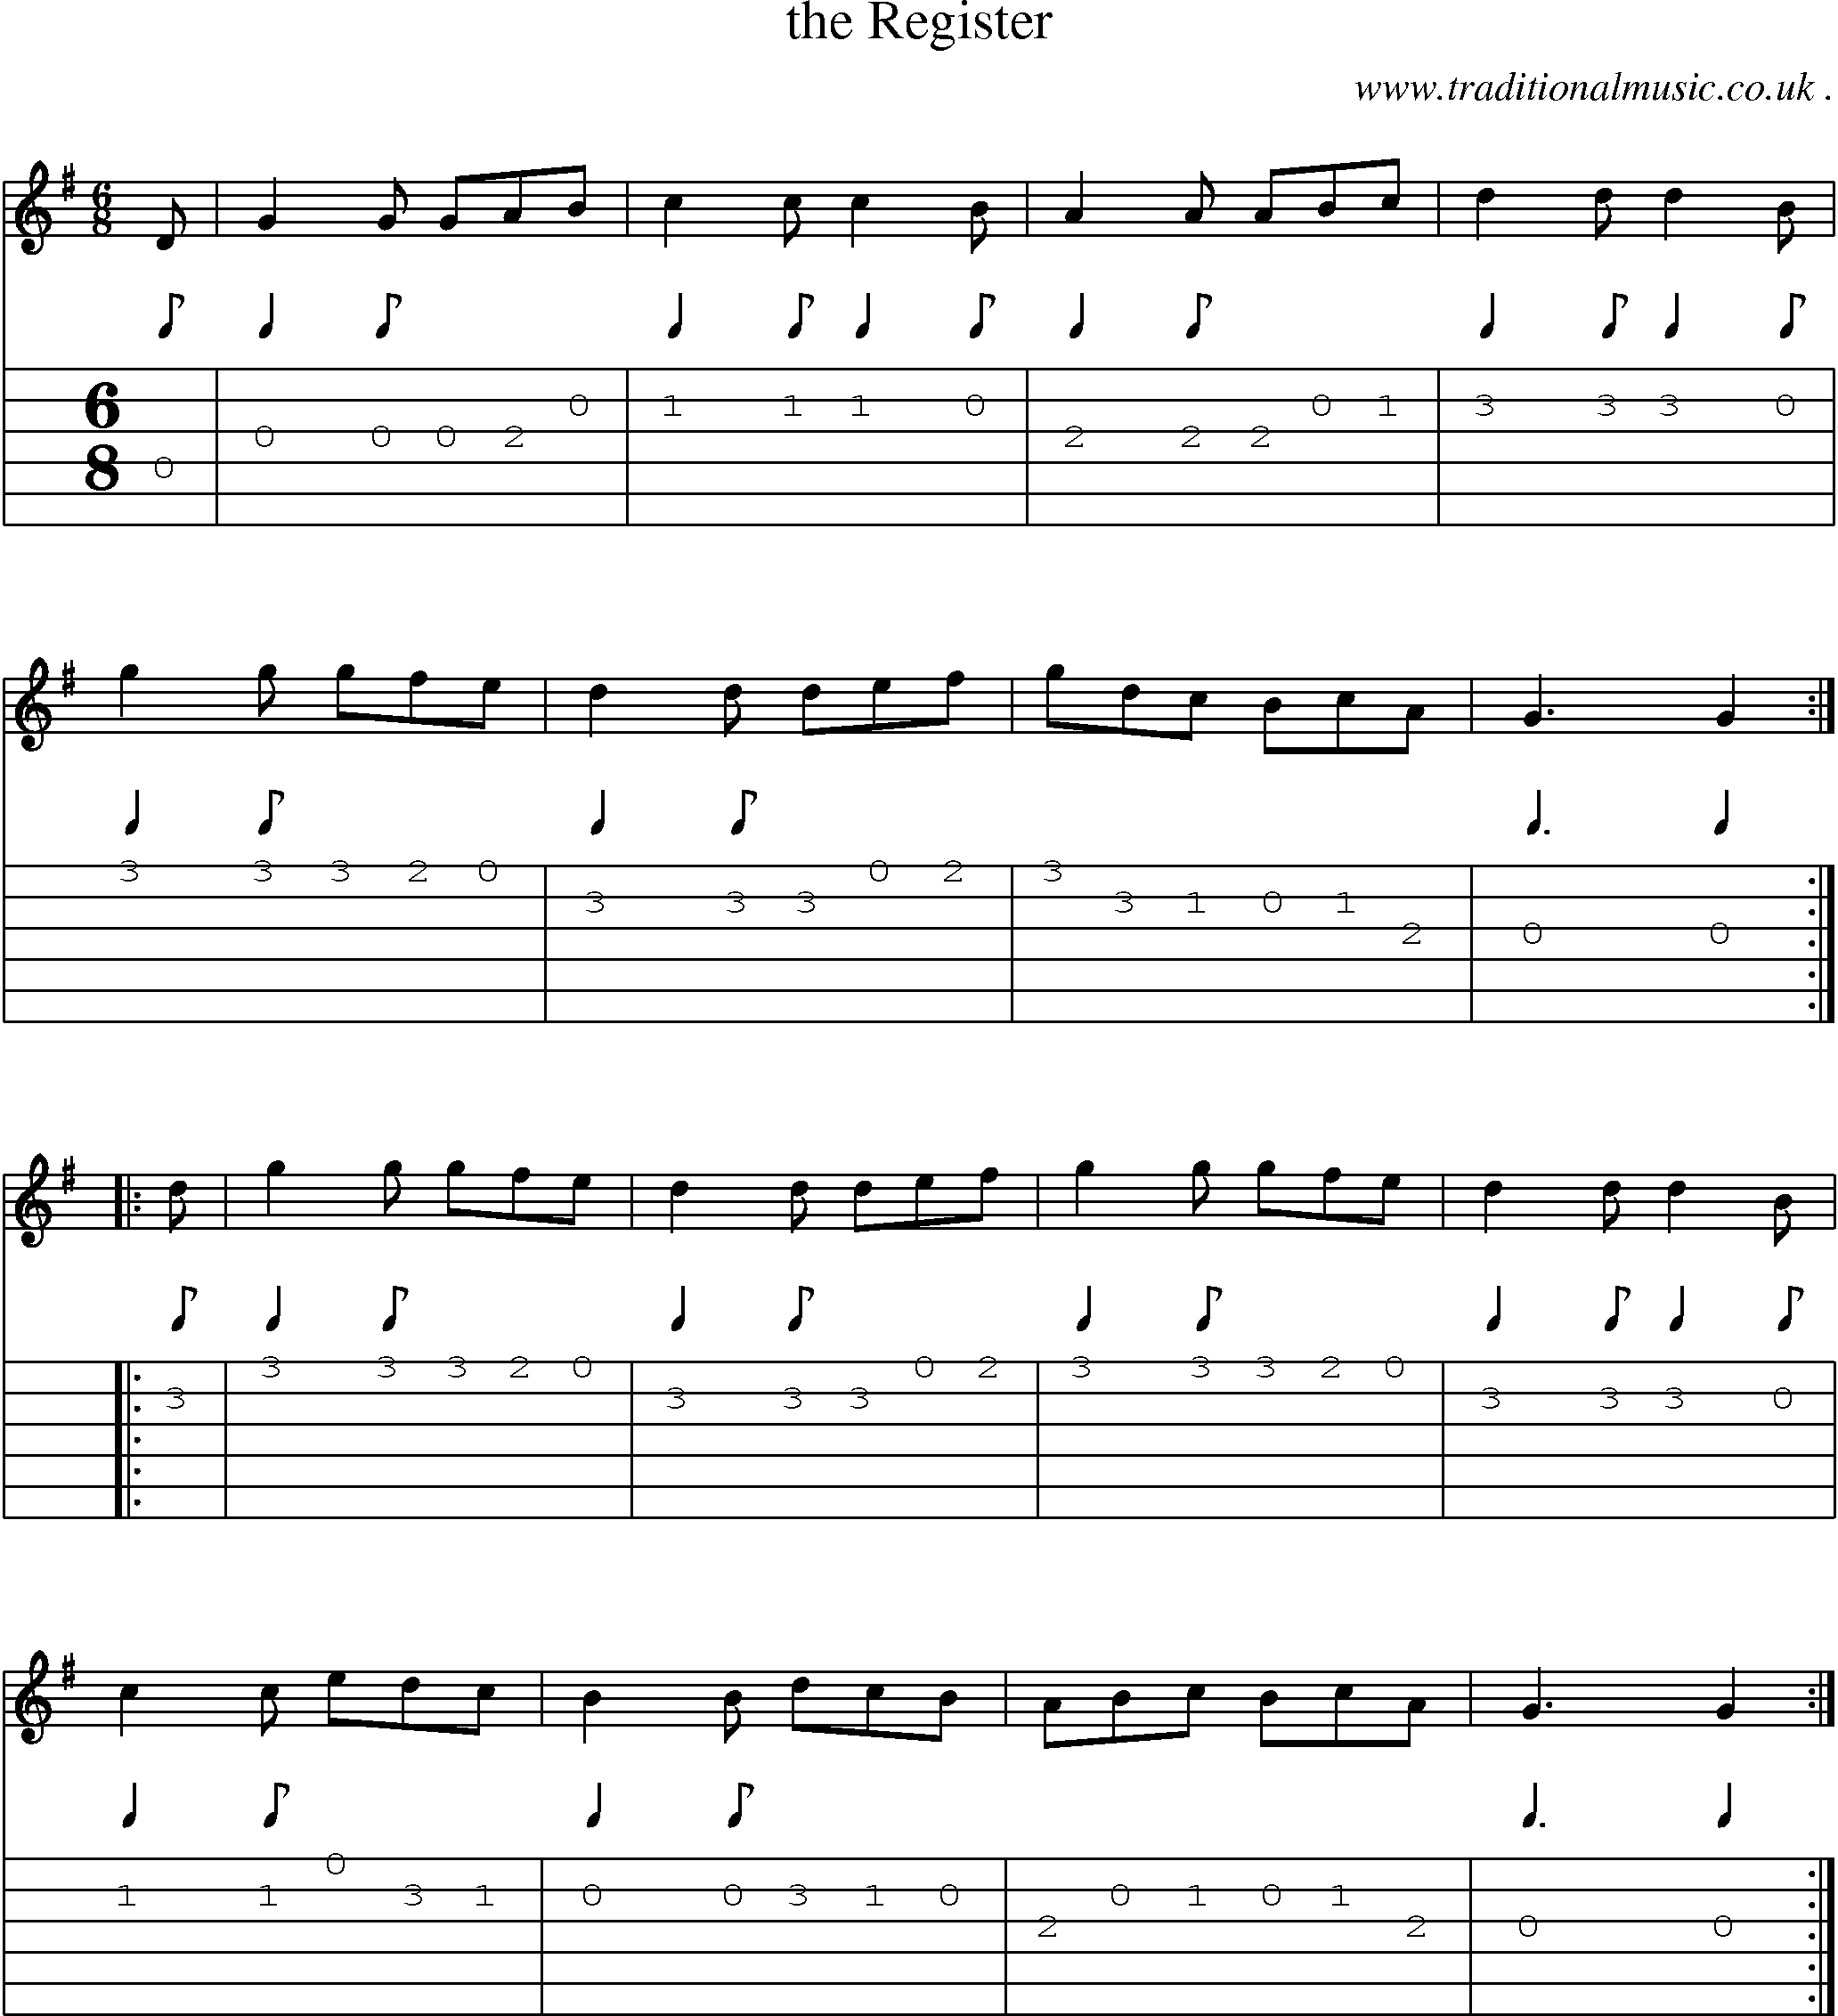 Sheet-Music and Guitar Tabs for The Register